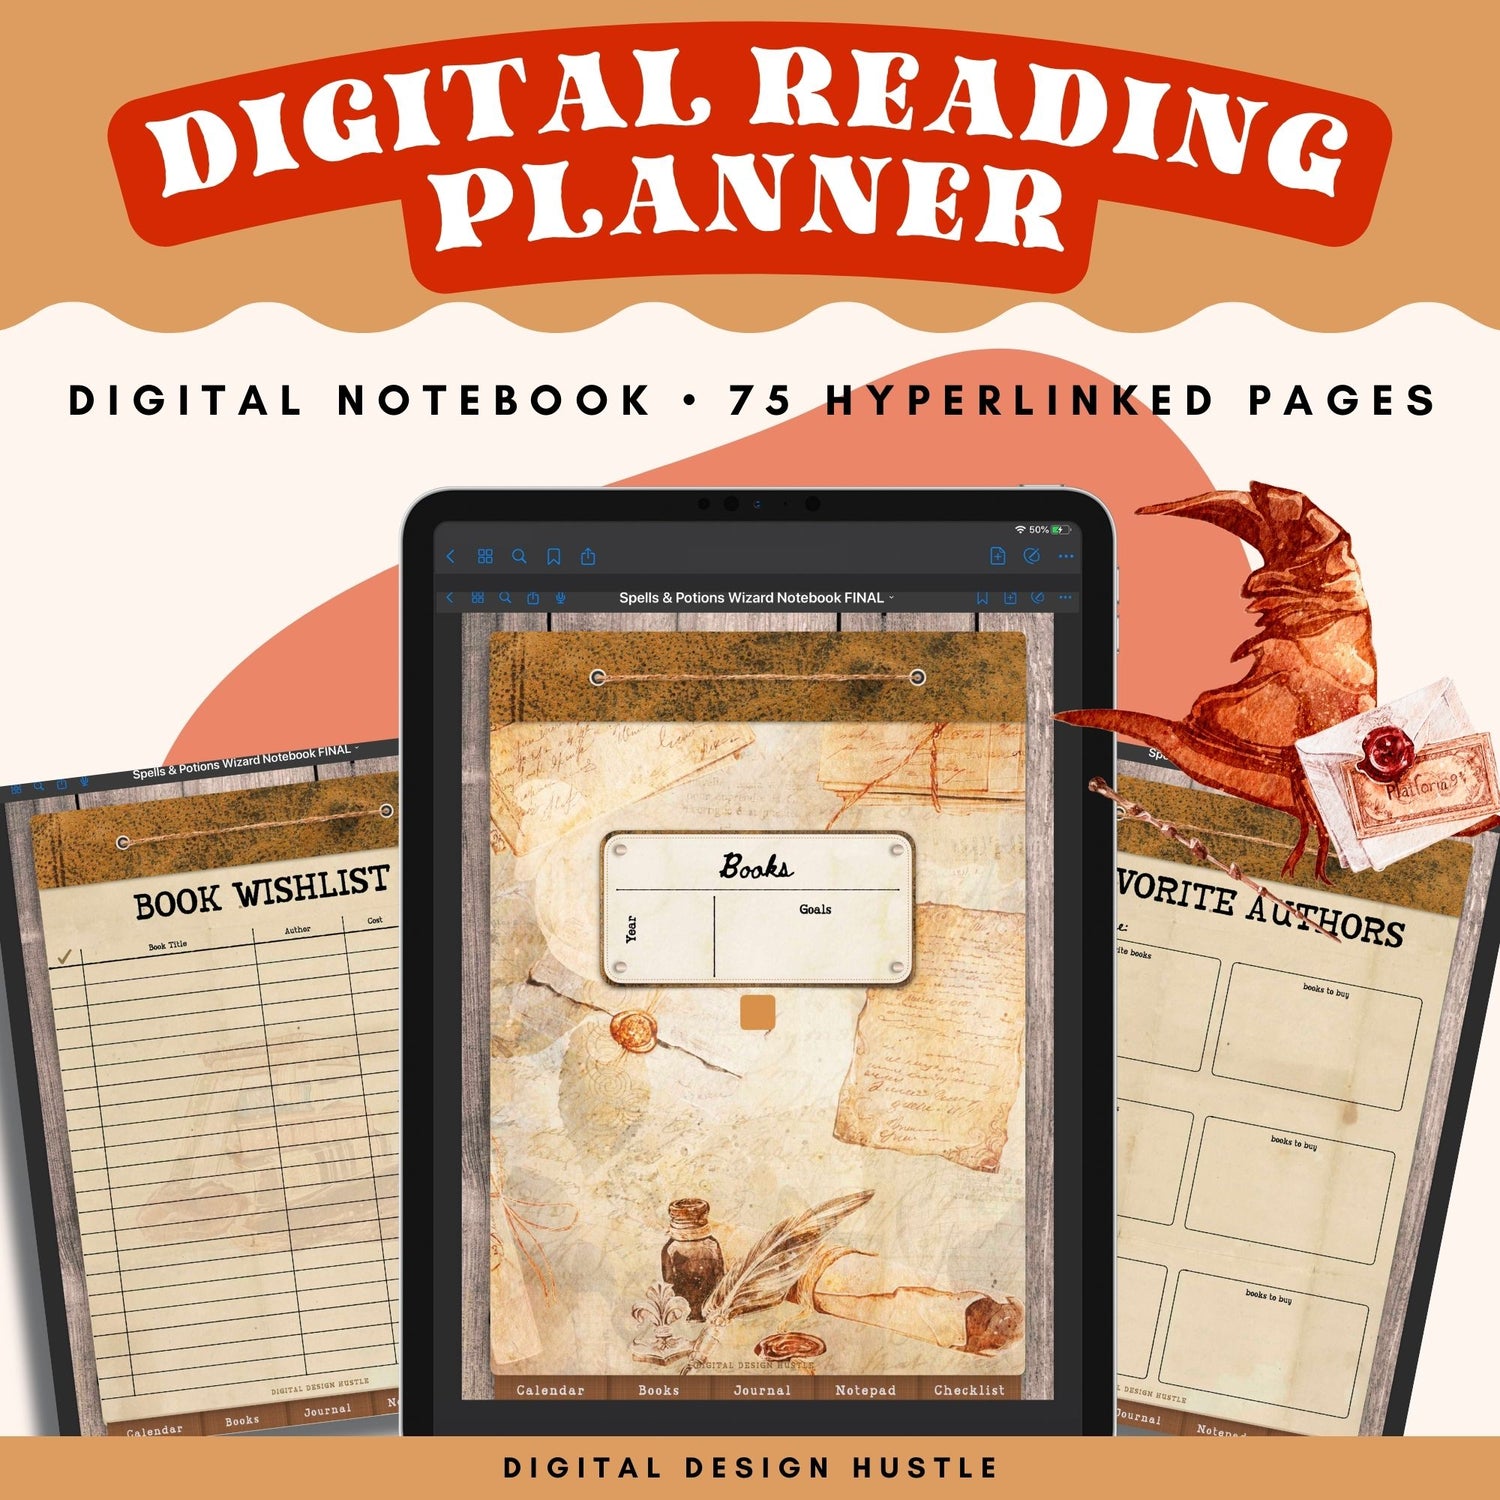 Welcome to the Sorcerers School of Wizardry! This Wizard School digital reading journal for wizards and sorcerers is a fun way to track reading progress, take notes in the digital notebook and write mythical spells and charms in the digital journal.